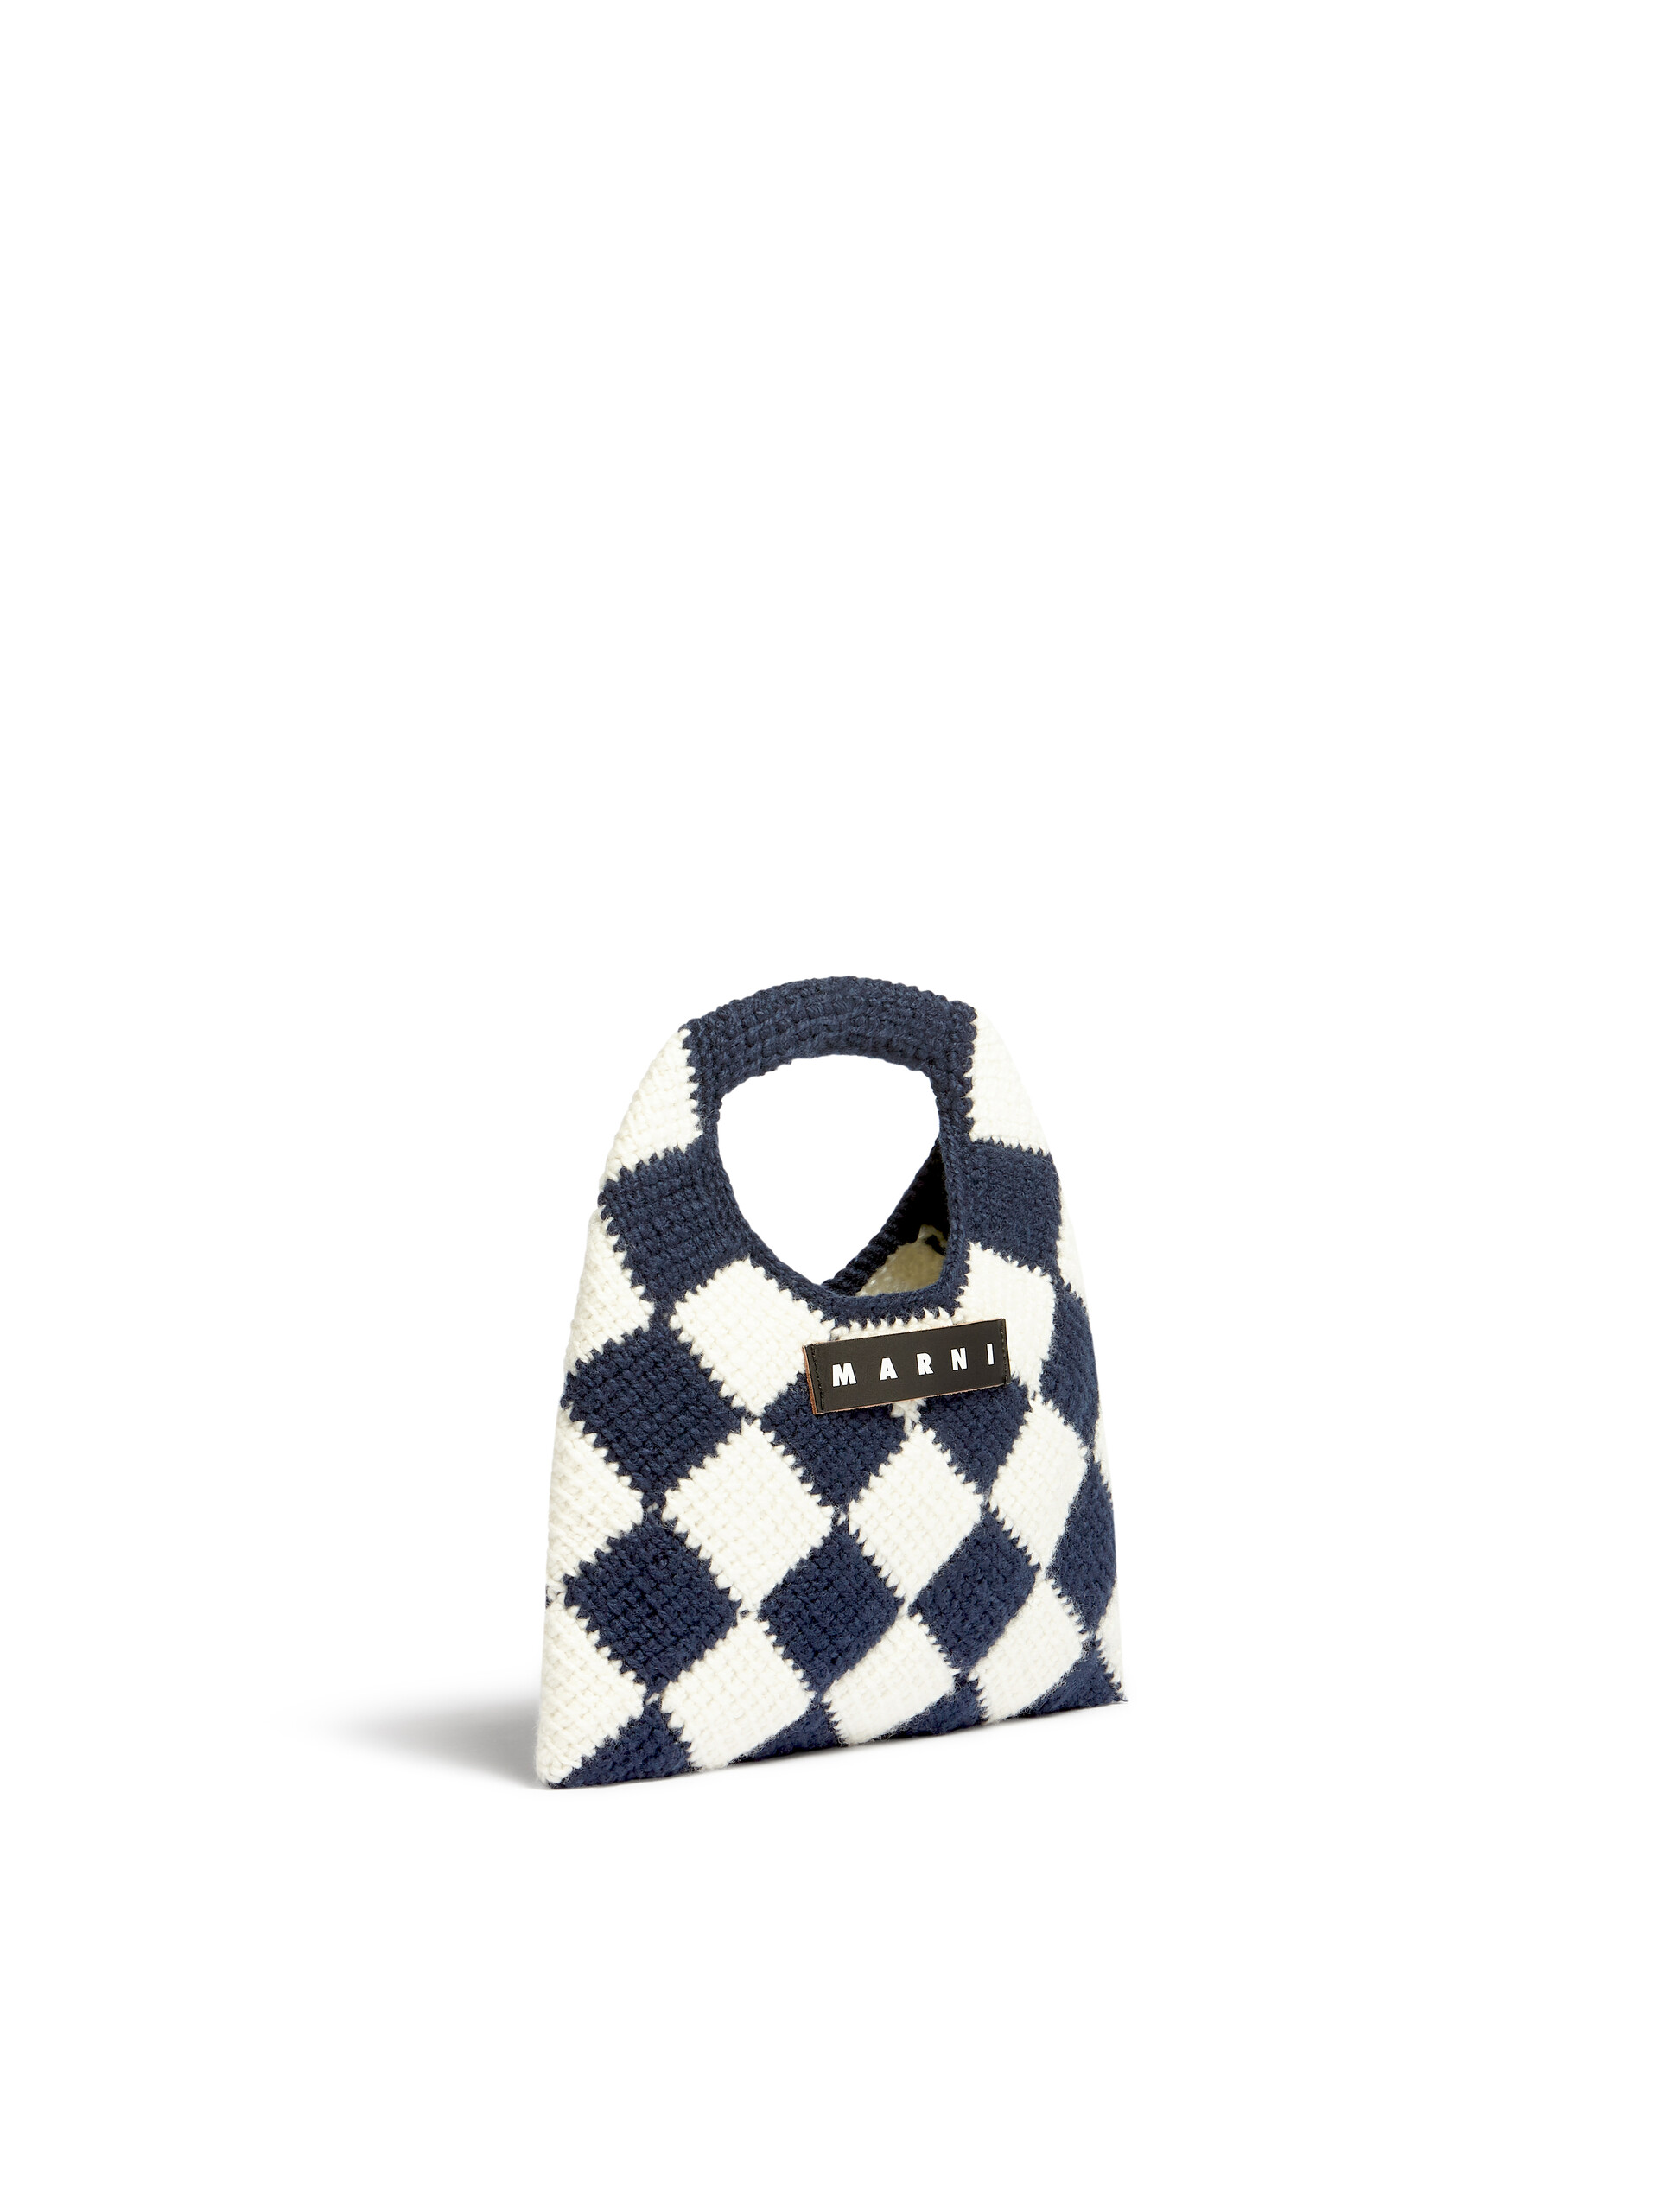 MARNI MARKET DIAMOND small bag in white and blue tech wool - Bags - Image 2